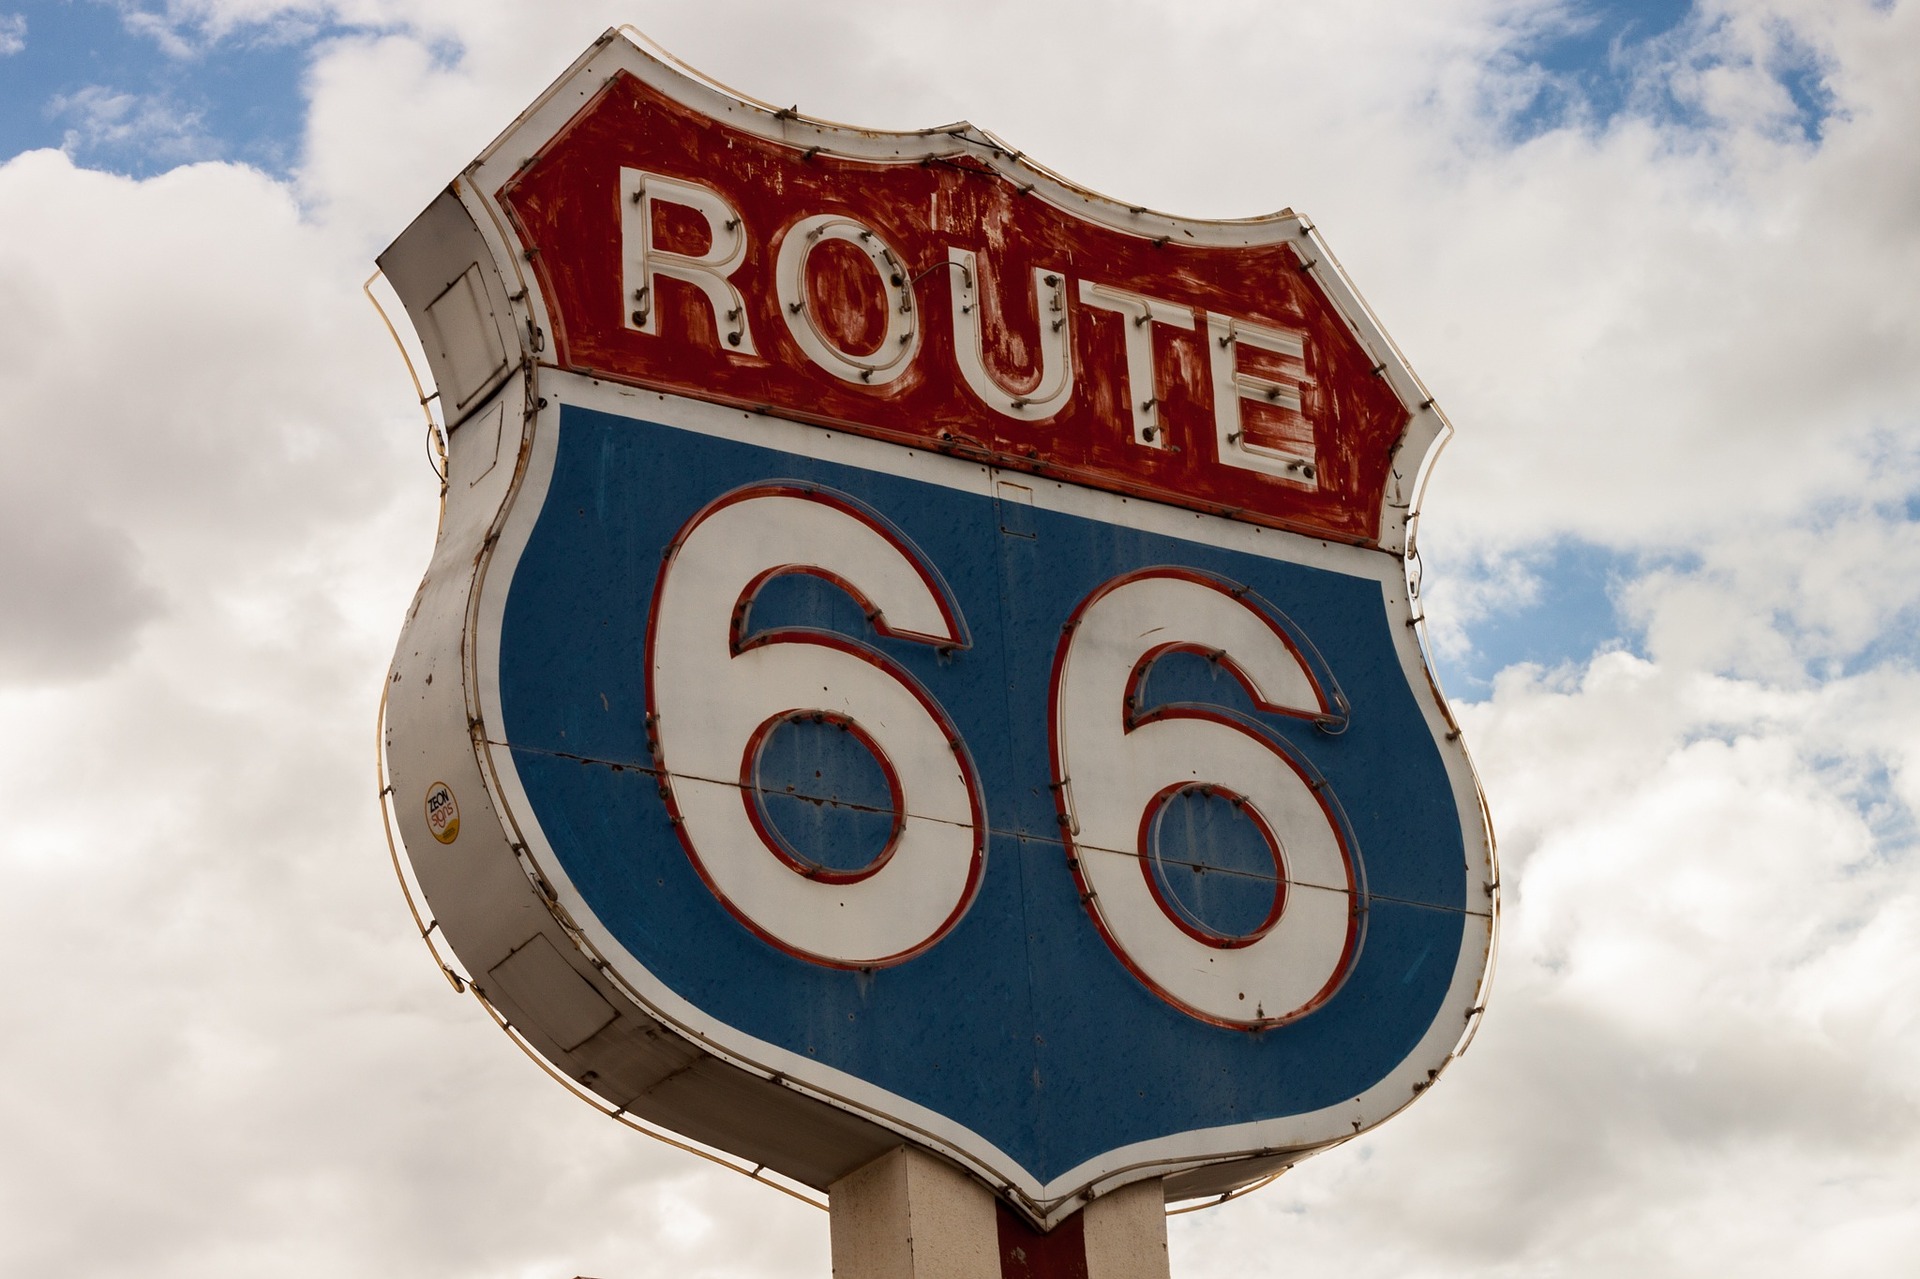 Route 66 母なる道 希望の道 アメリカ高校留学 アメリカ 留学の教科書 Intrax Ayusa